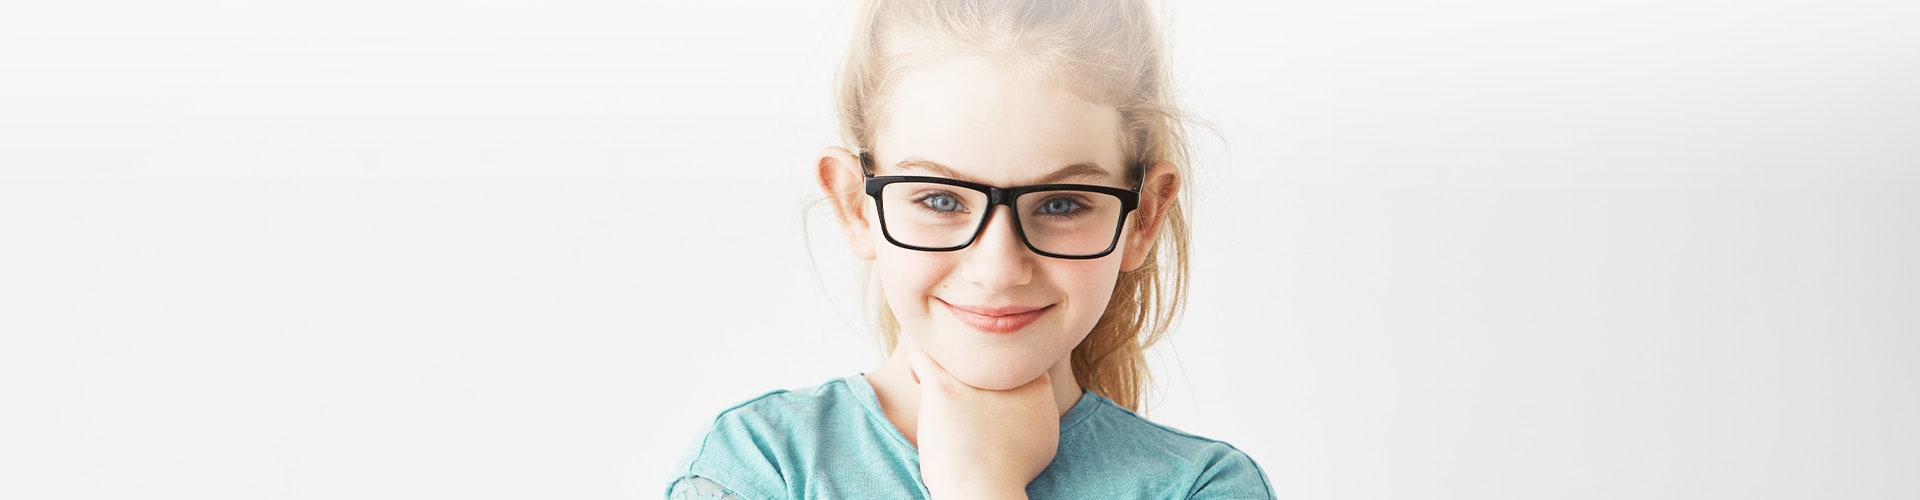 young girl wearing glasses